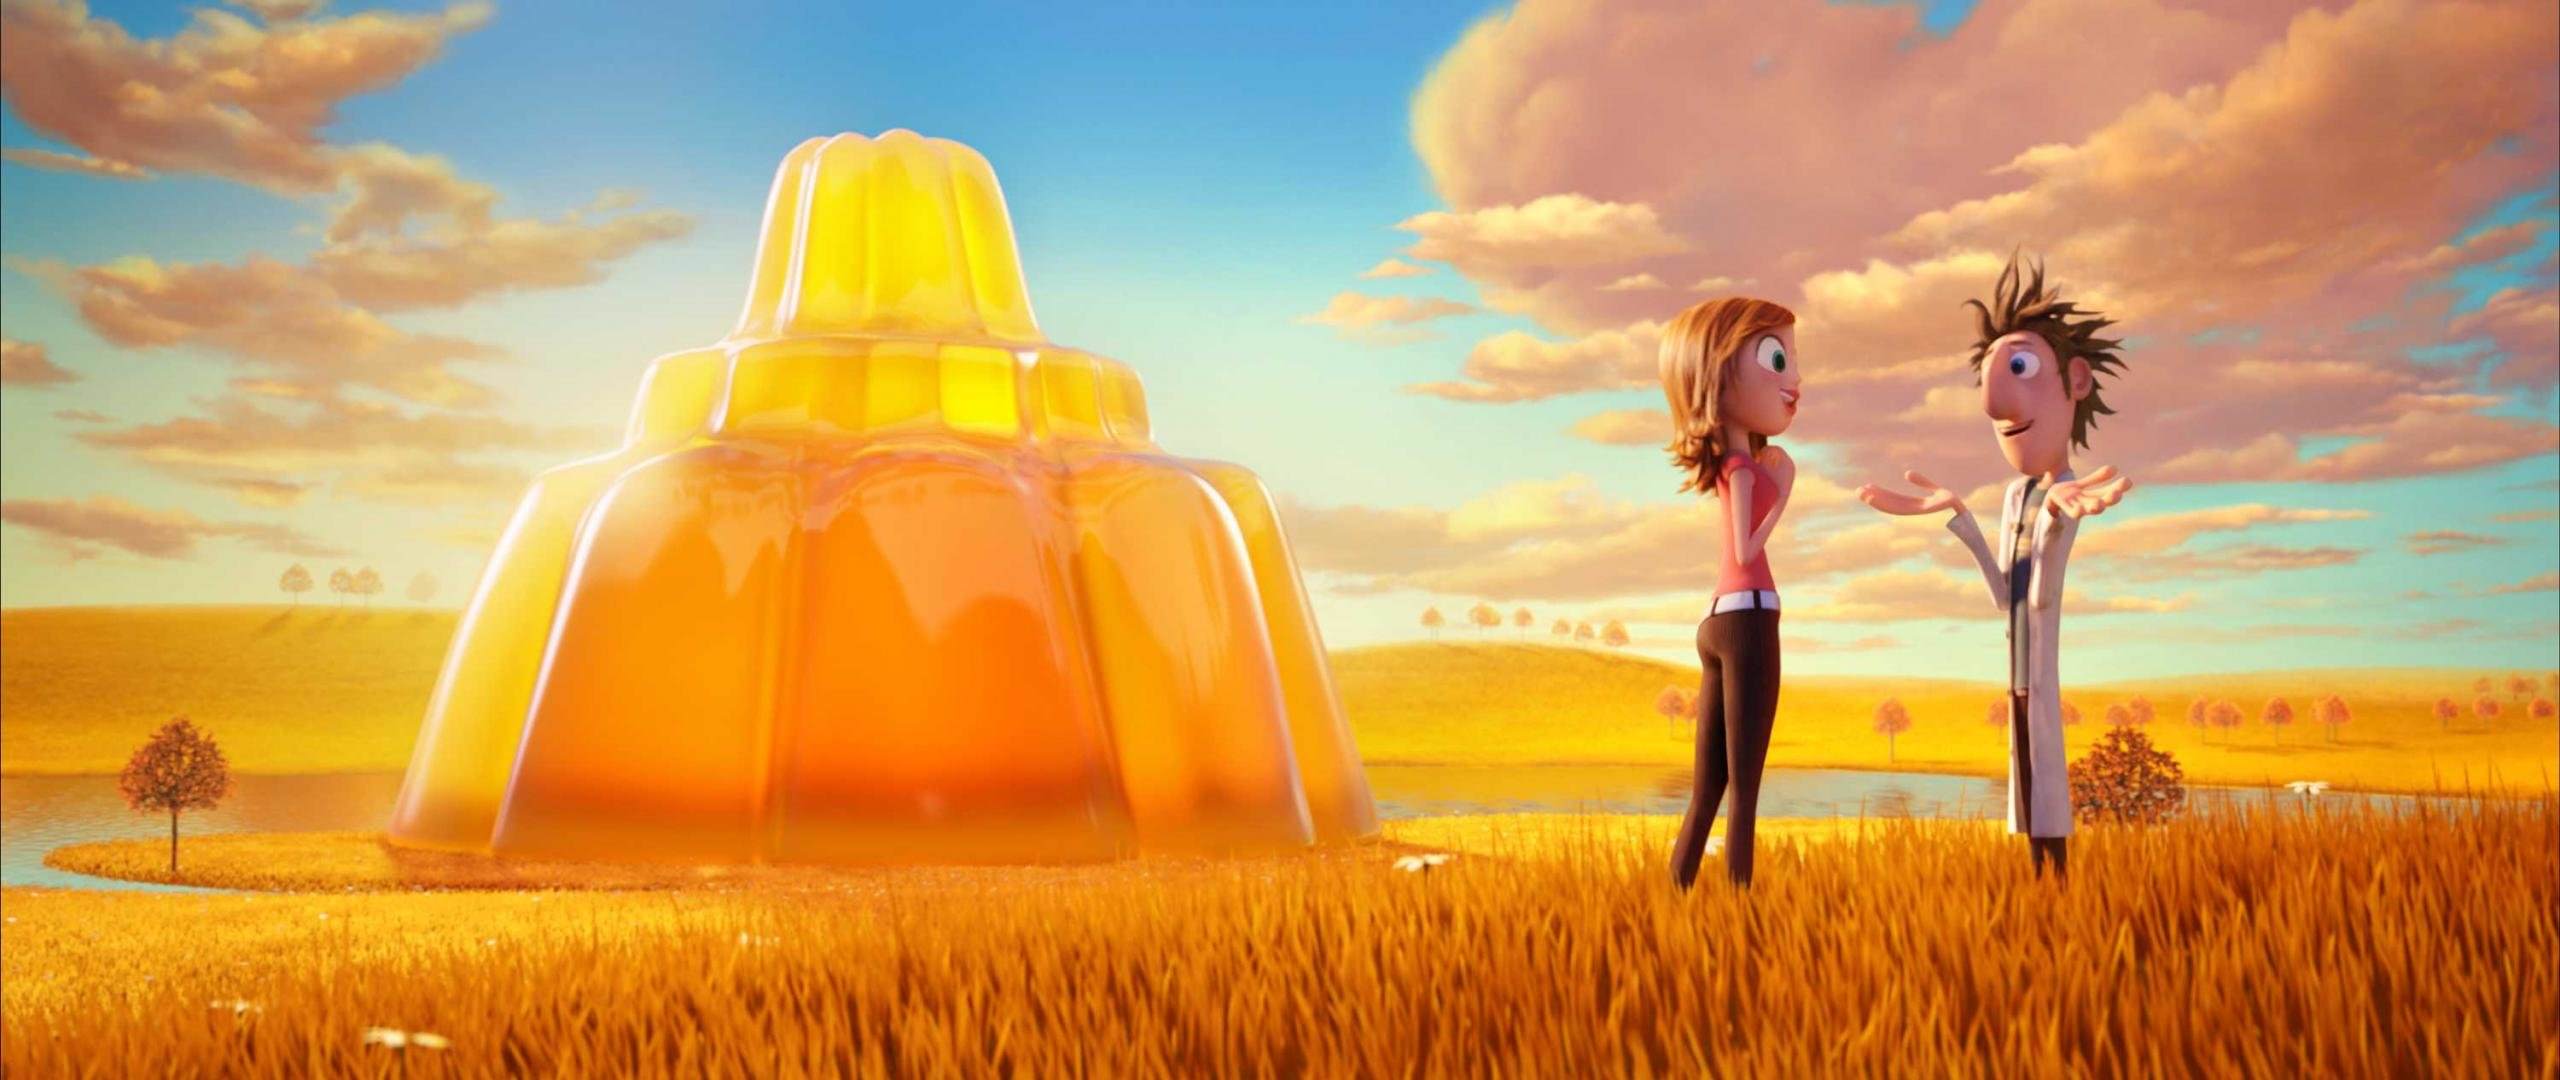 Awesome Cloudy With A Chance Of Meatballs free wallpaper